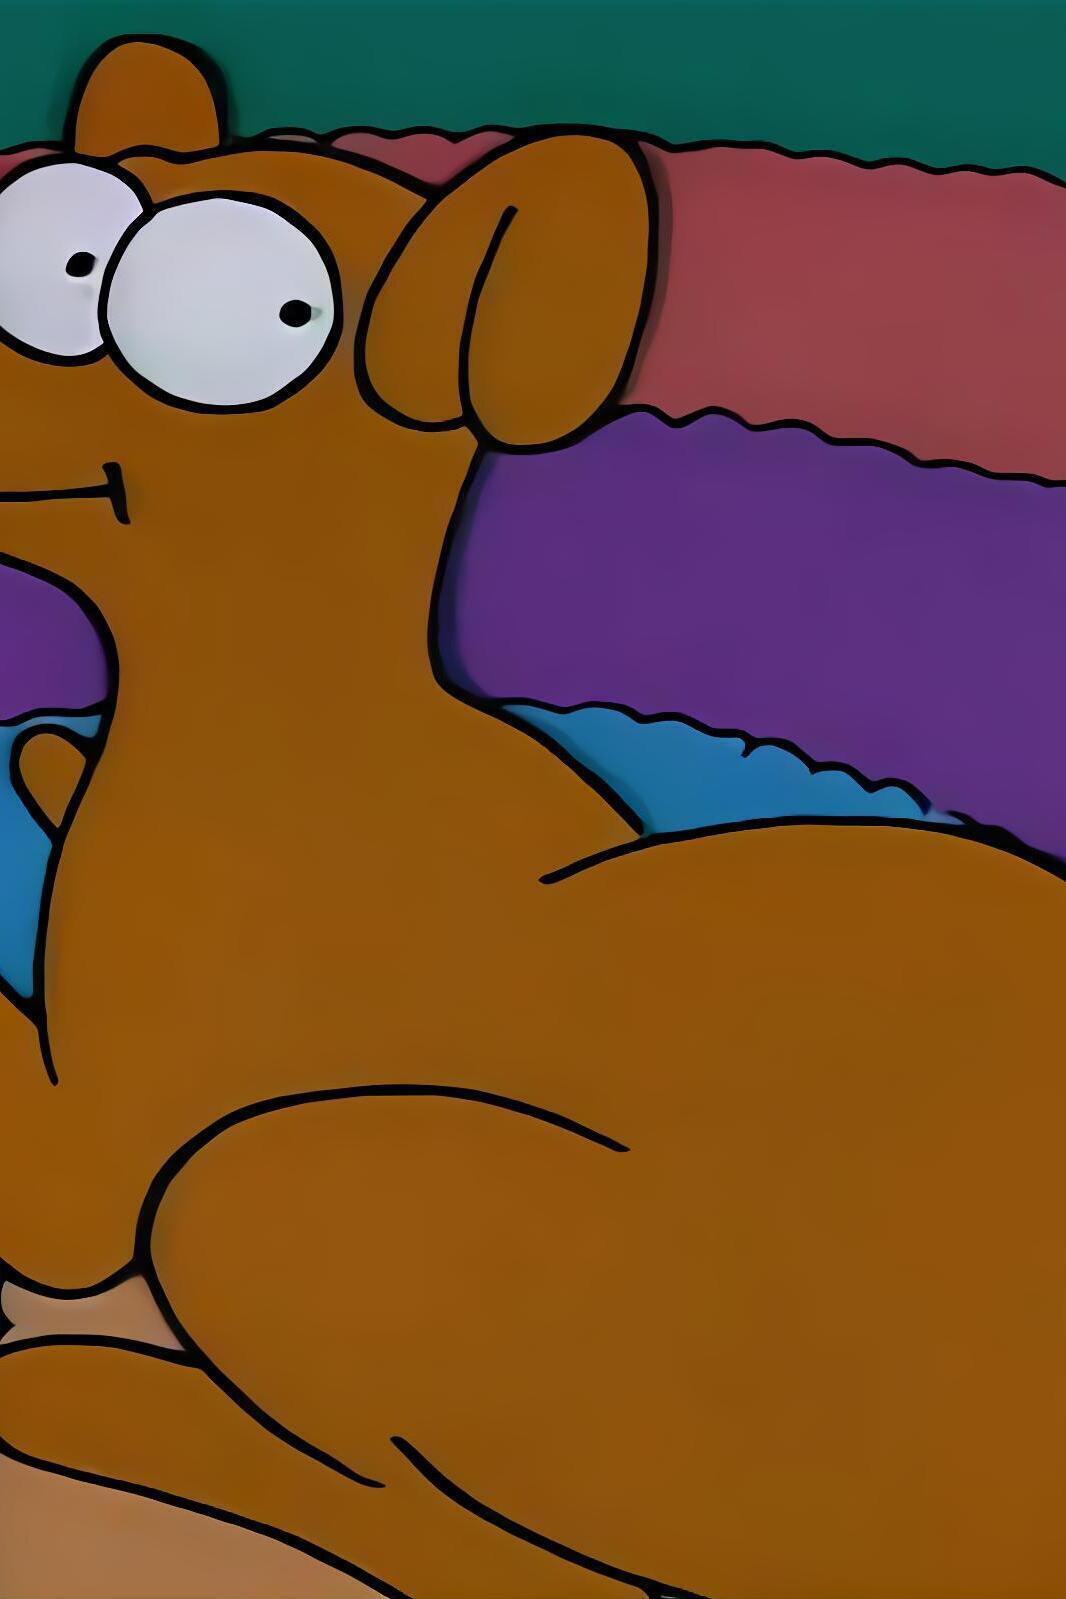 The Simpsons - Bart's Dog Gets an F